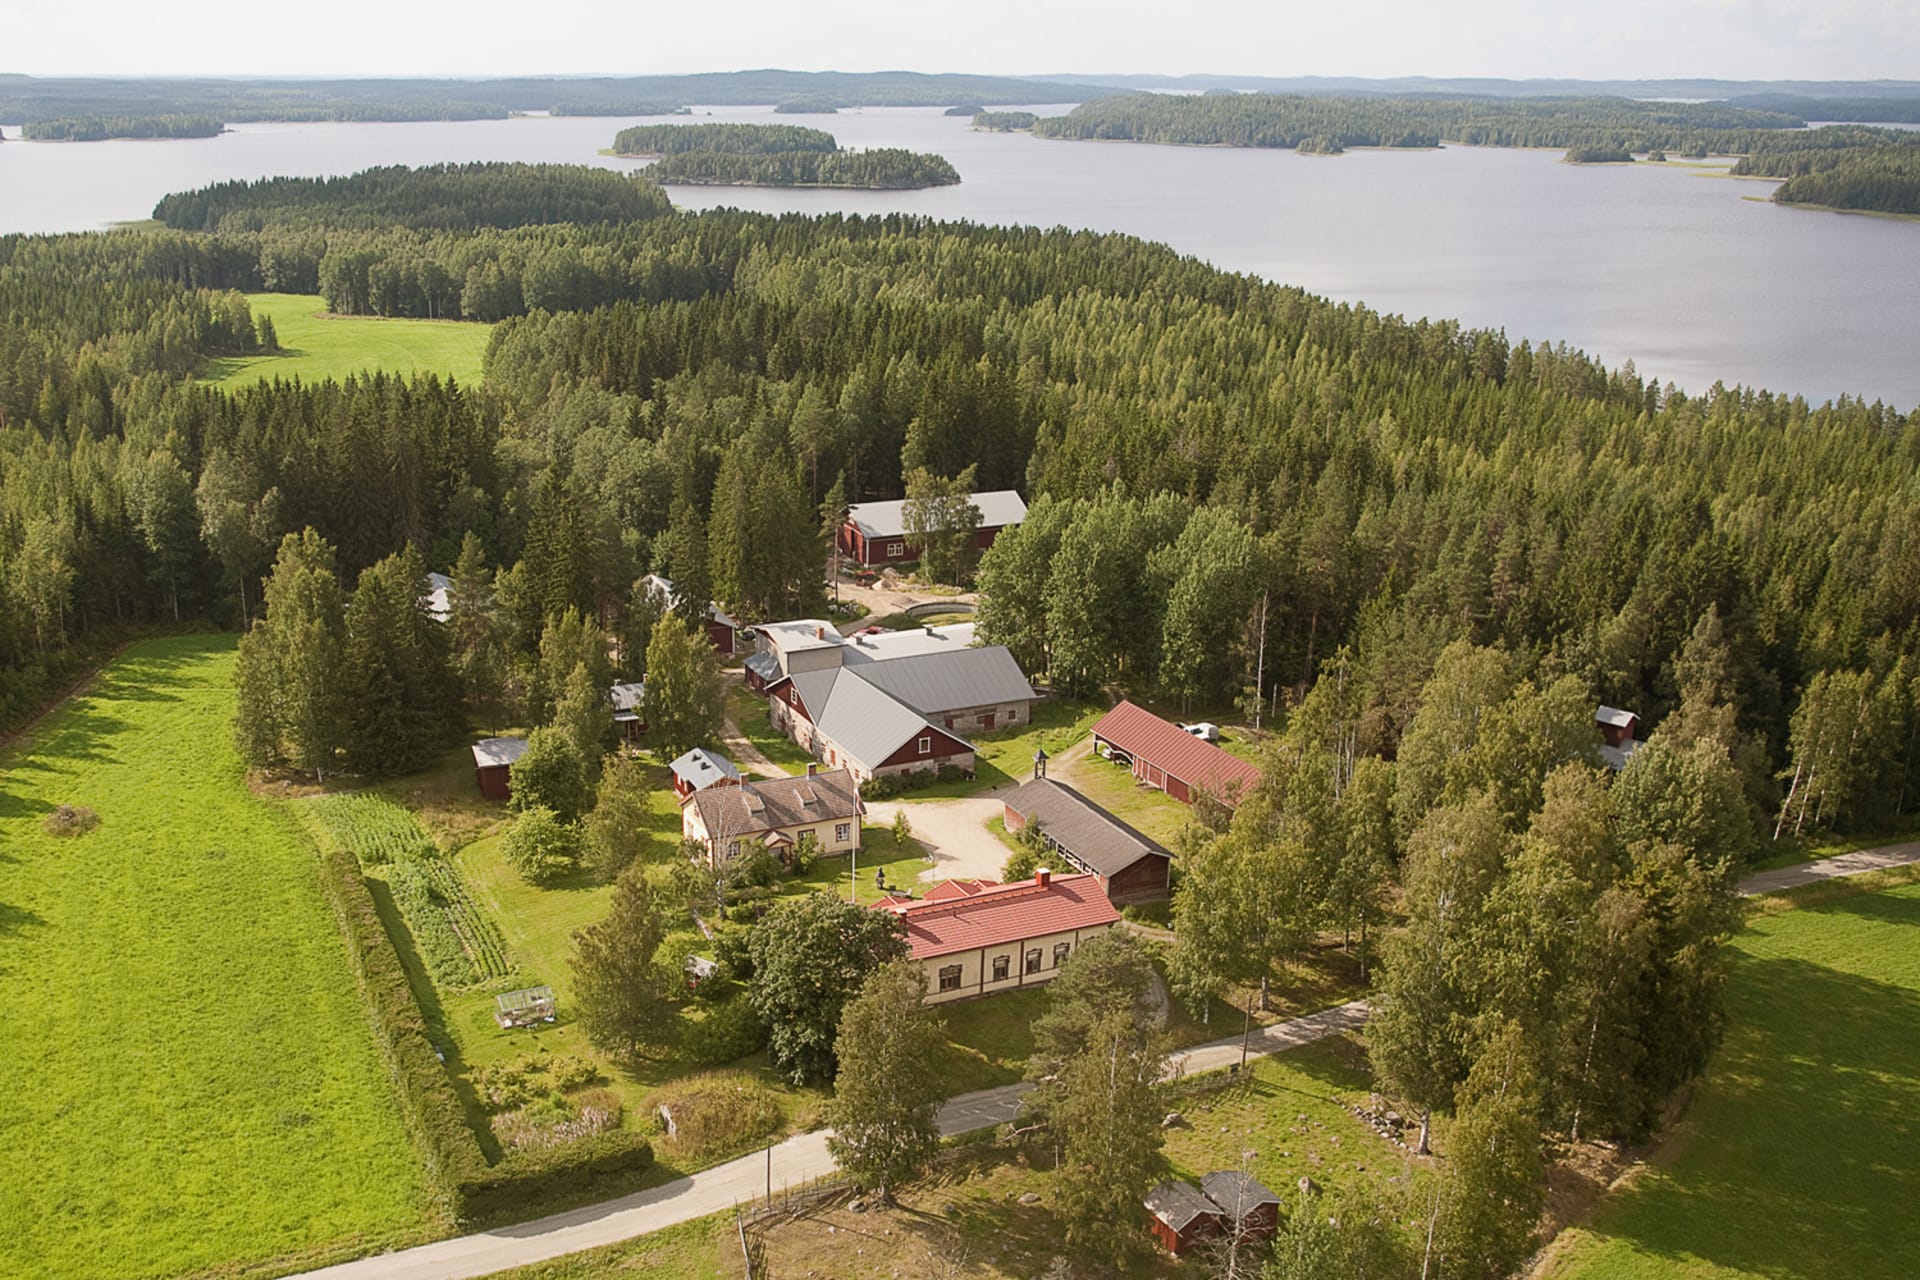 The aerial view of the Ylä-Tuuhonen Farm shows the farm's buildings, fields, forest and Lake Tarjanne.